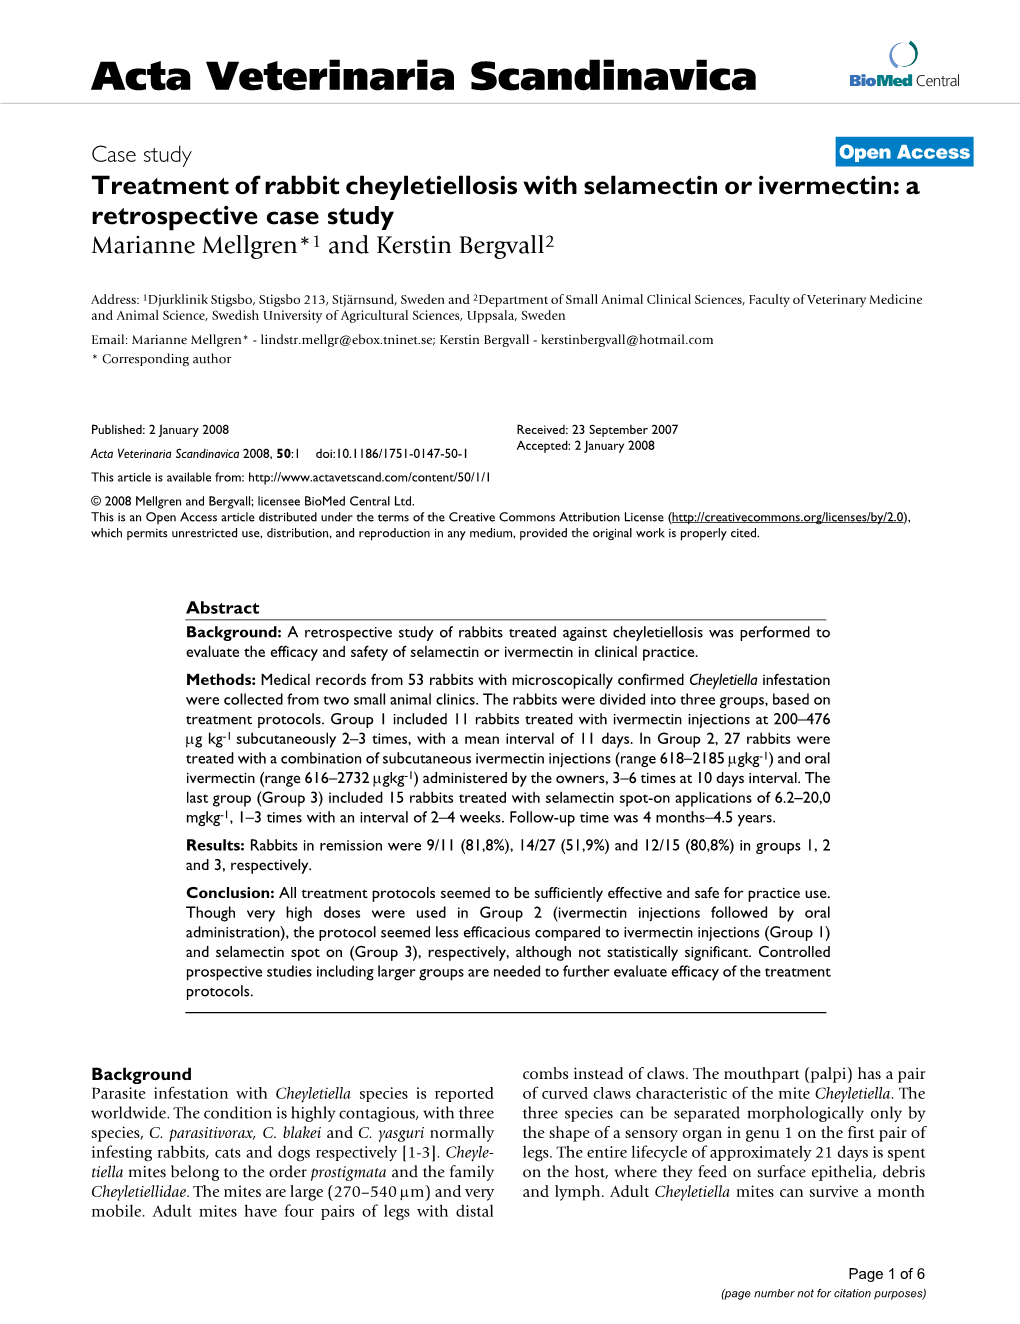 Treatment of Rabbit Cheyletiellosis with Selamectin Or Ivermectin: a Retrospective Case Study Marianne Mellgren*1 and Kerstin Bergvall2